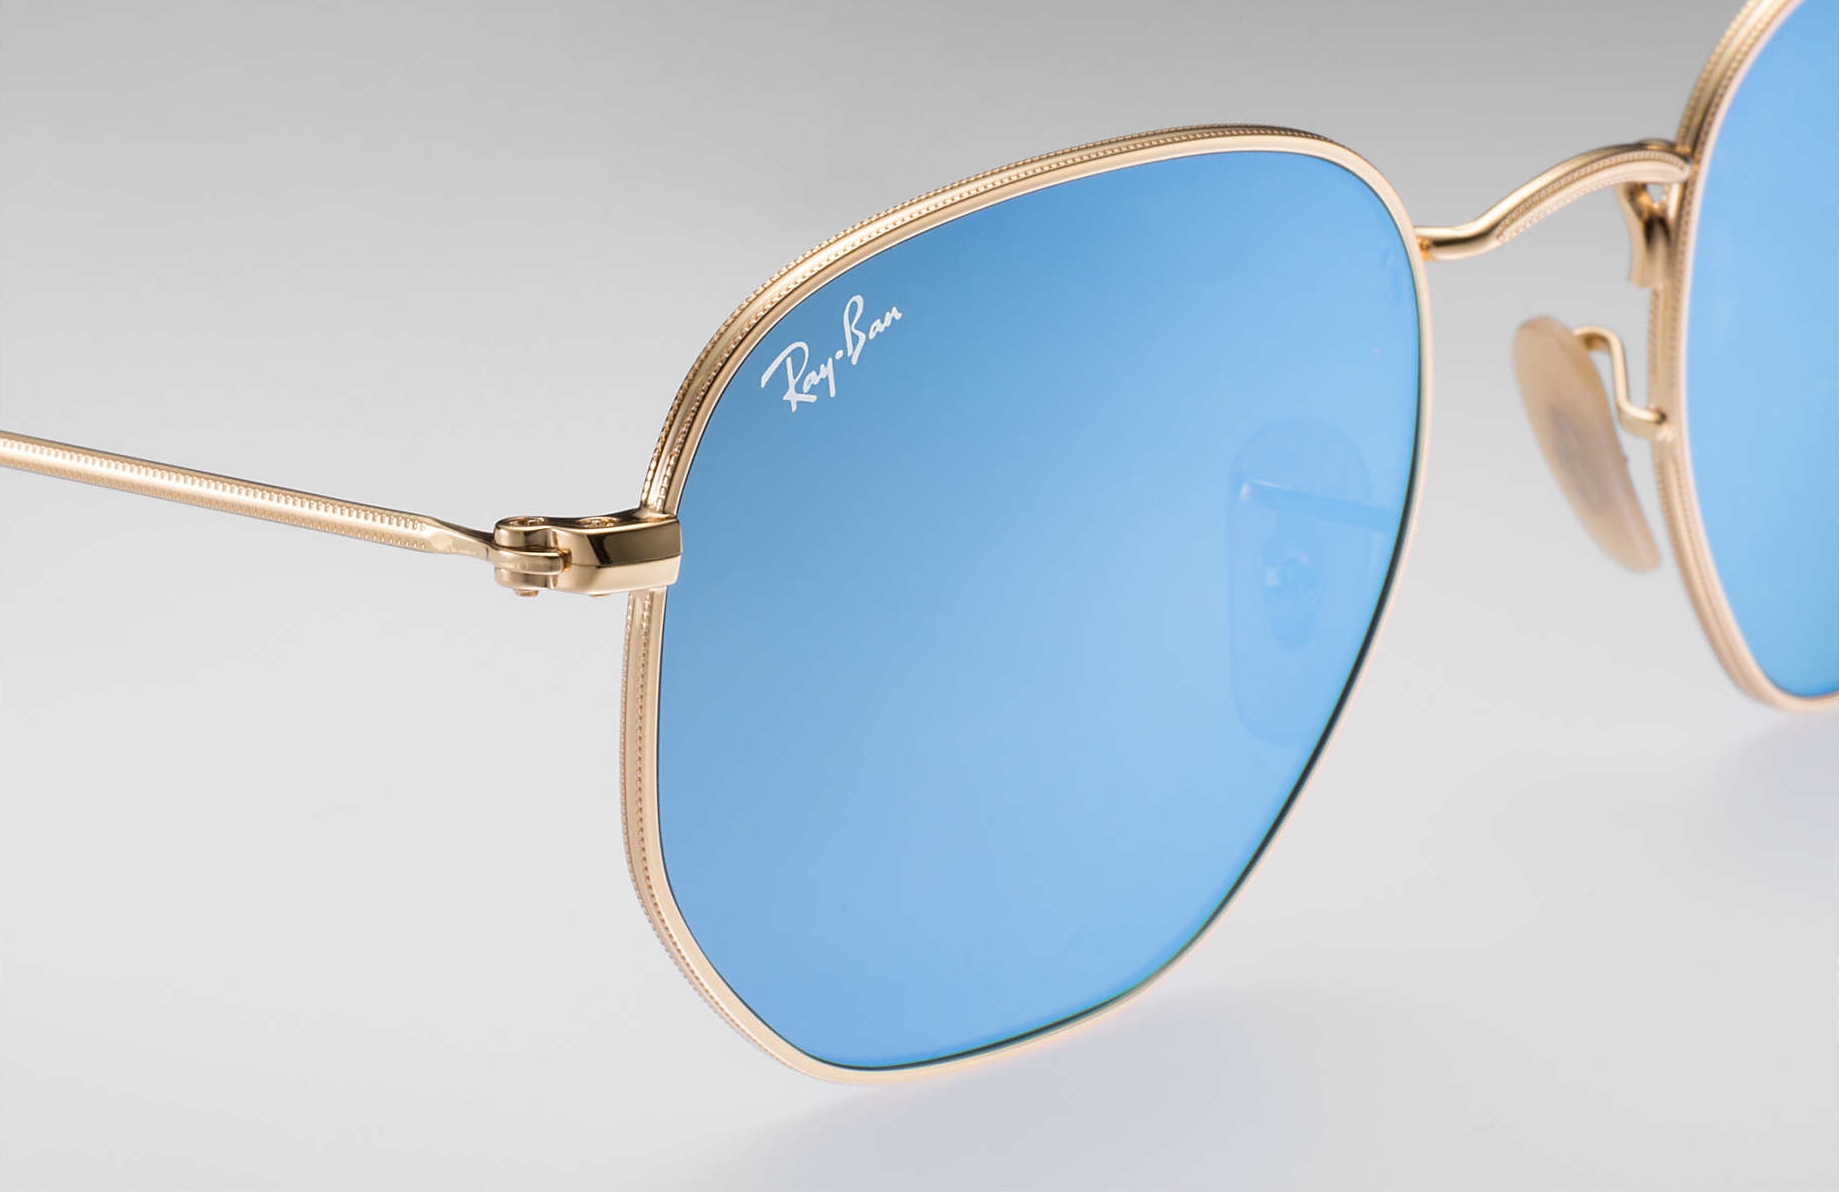 ray ban aviator sunglasses price in army canteen